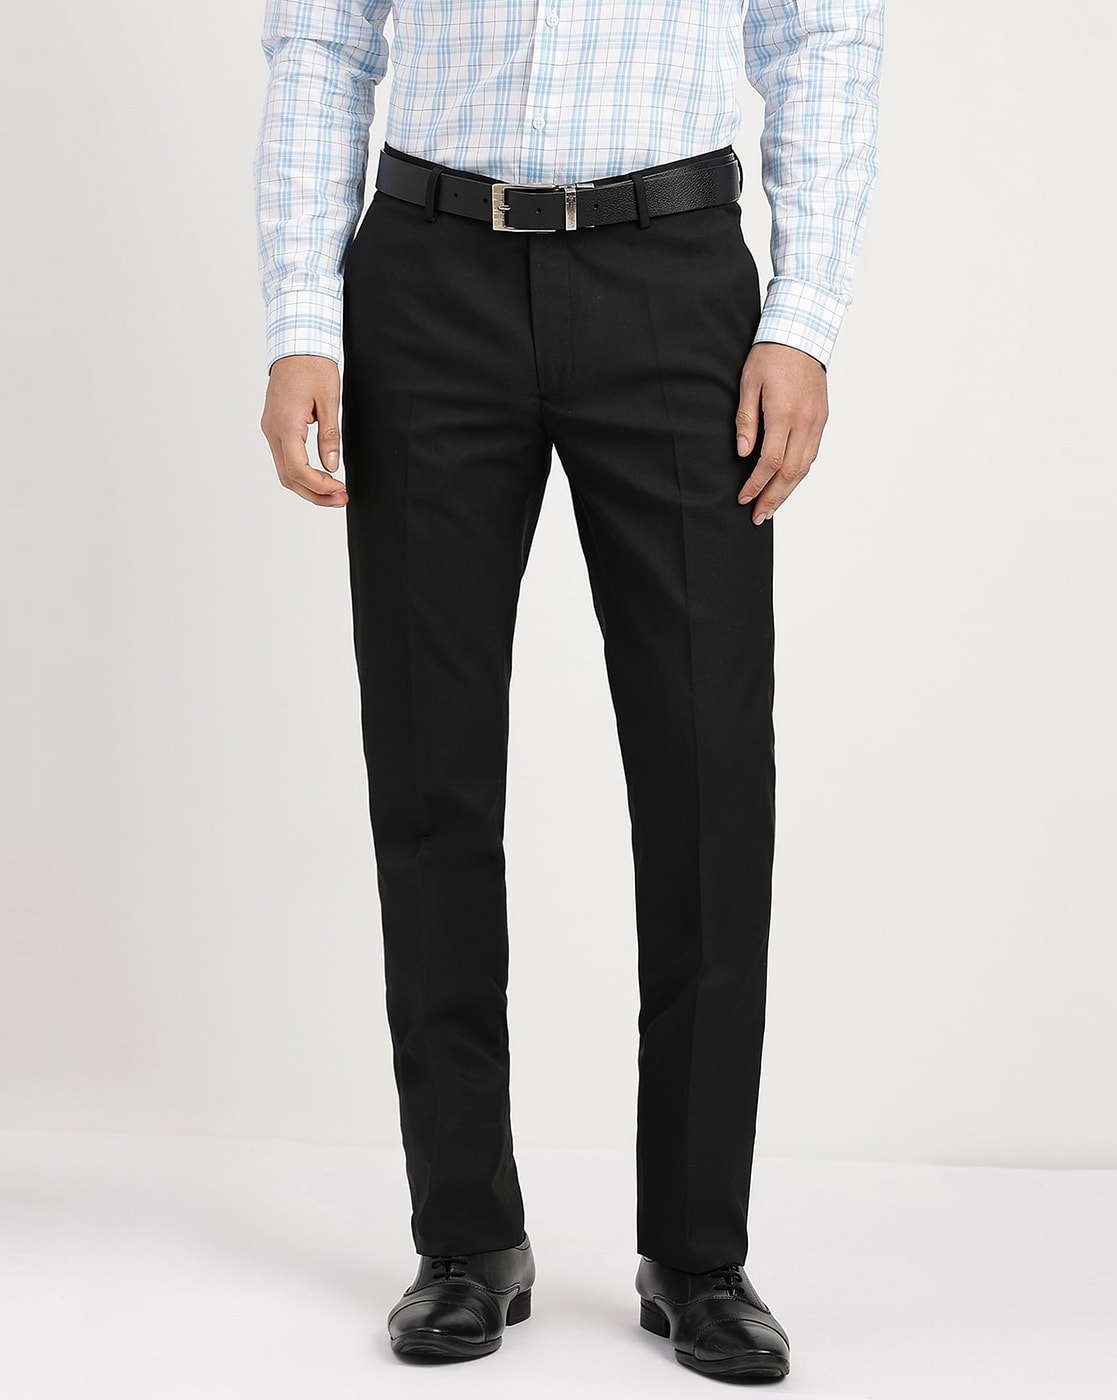 Arrow Formal Trousers outlet - Men - 1800 products on sale | FASHIOLA.co.uk